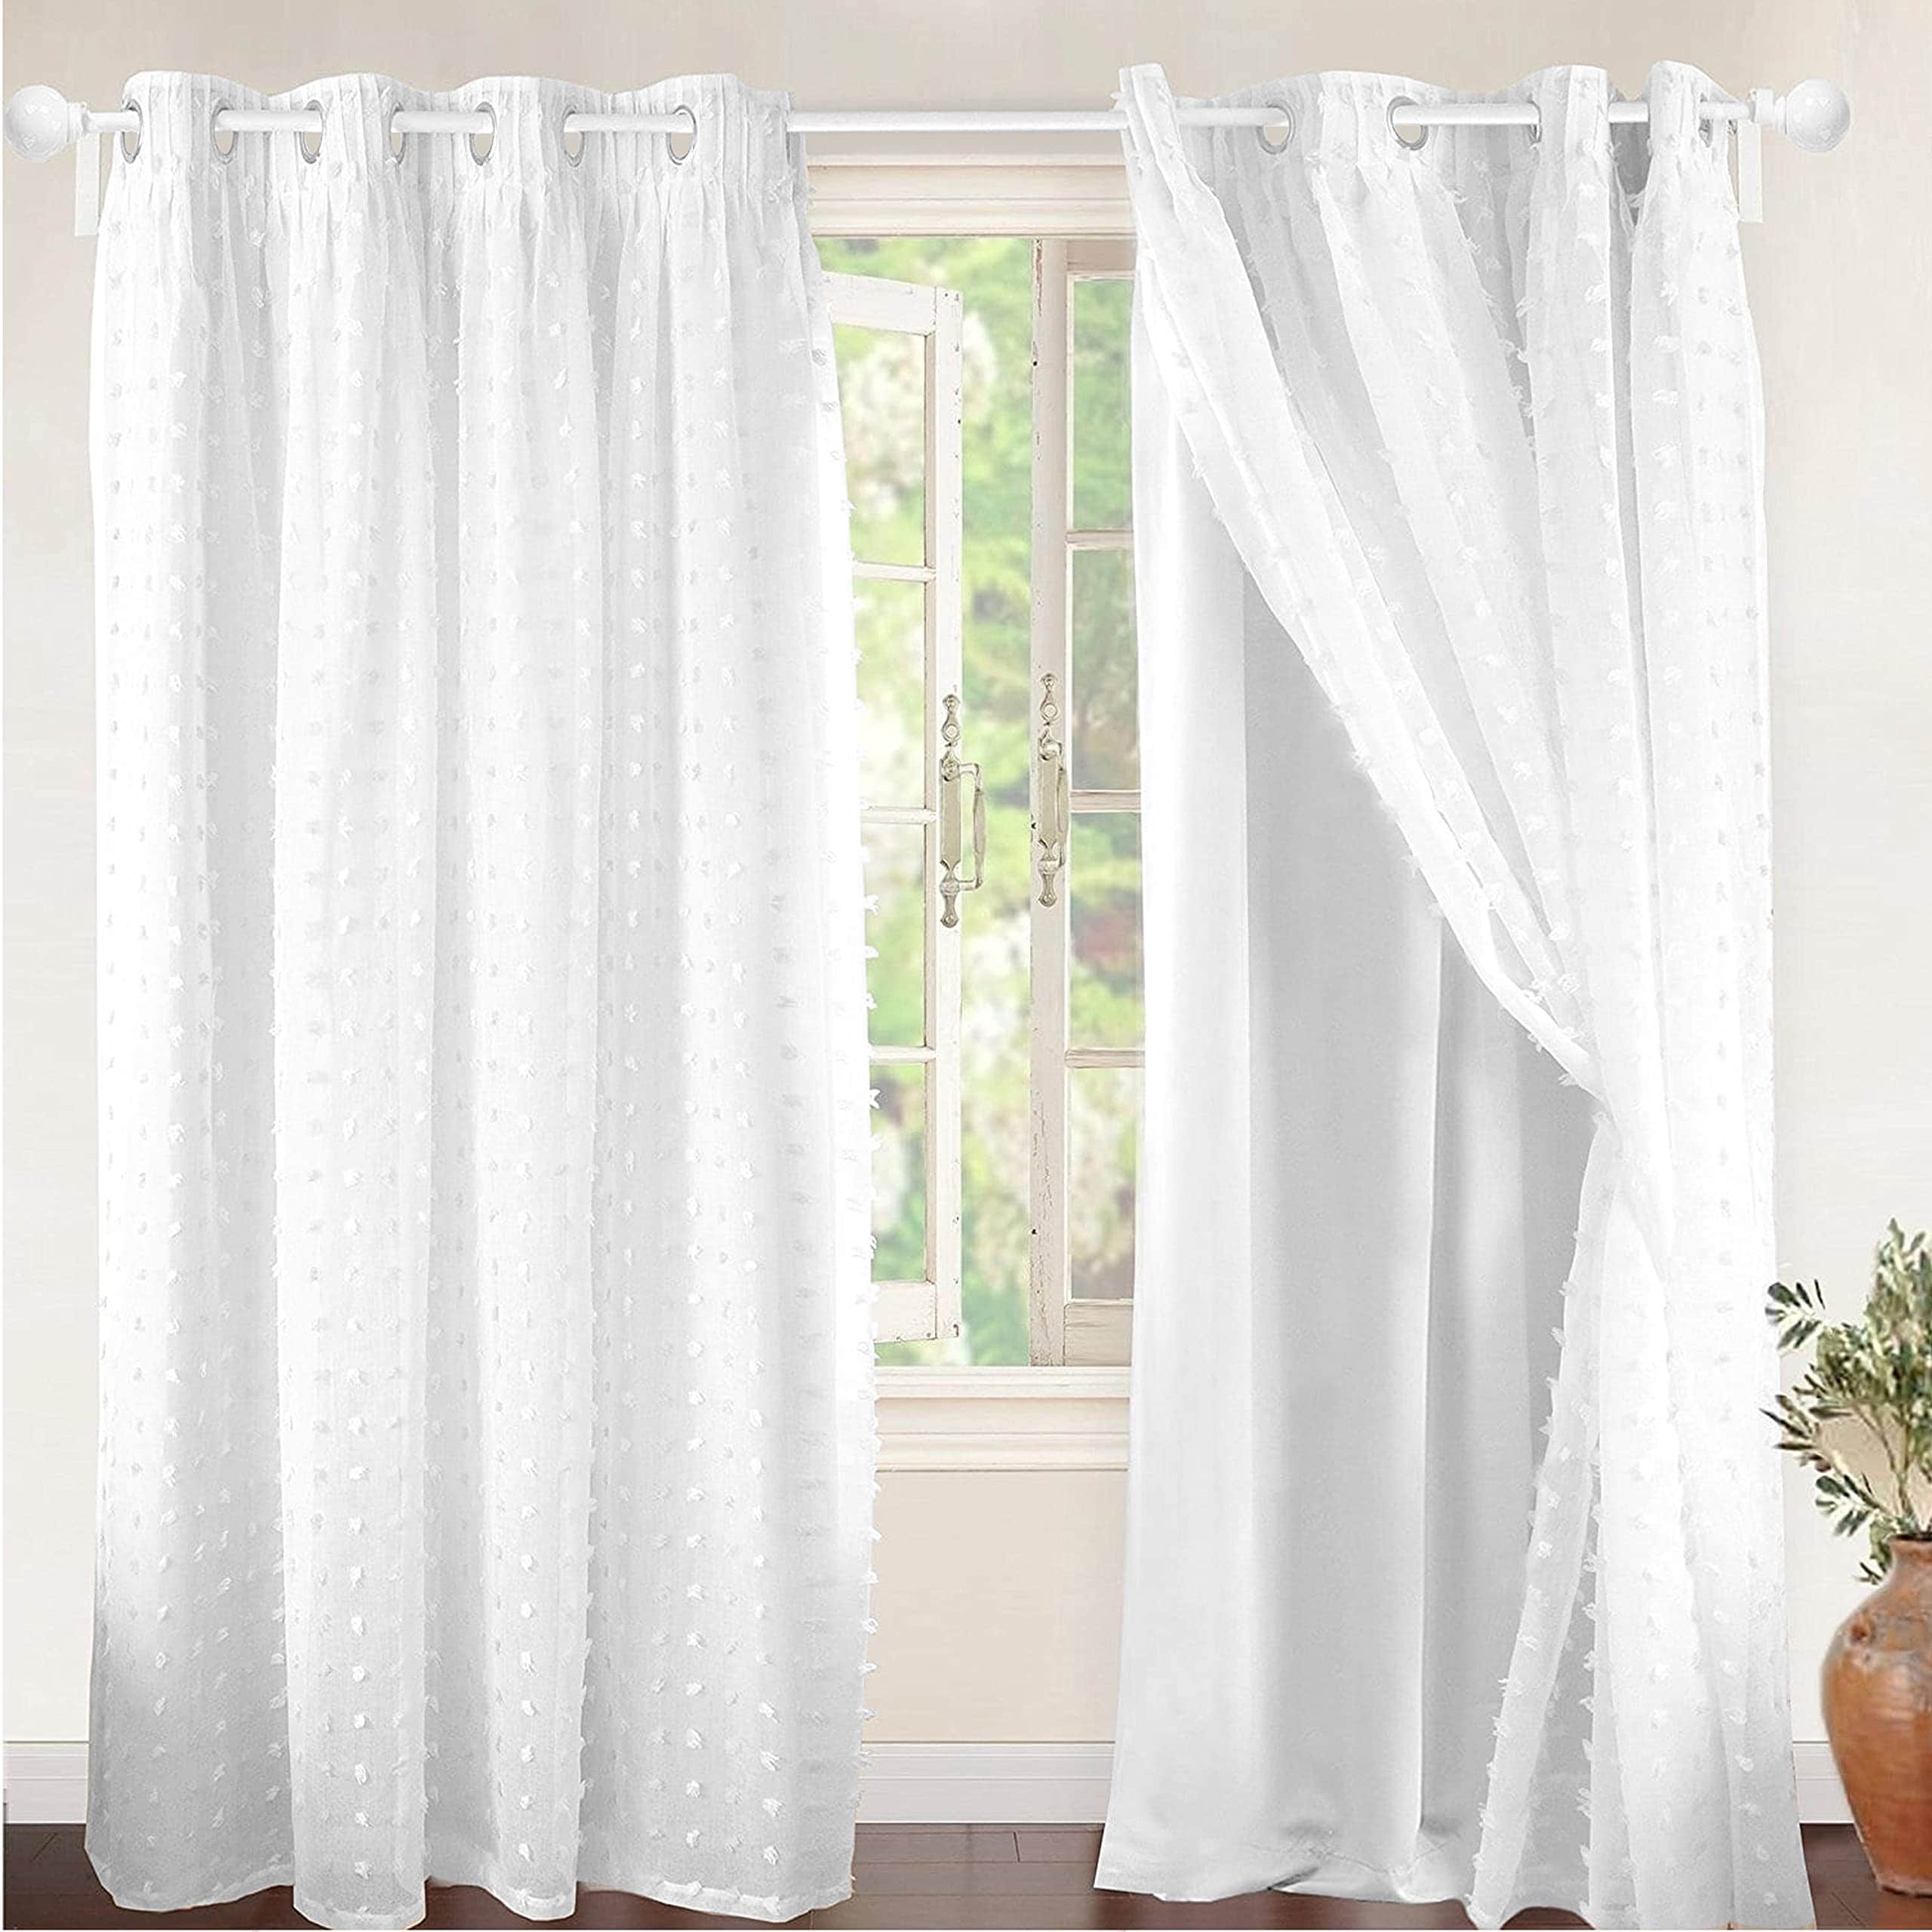 https://ak1.ostkcdn.com/images/products/is/images/direct/53466a2621d154af906afadbab9a3cec7b7420fe/DriftAway-Lily-Pom-Pom-Sheer-Blackout-Window-Curtain-Grommet-2-Panels-52-Inch-by-84-Inch.jpg